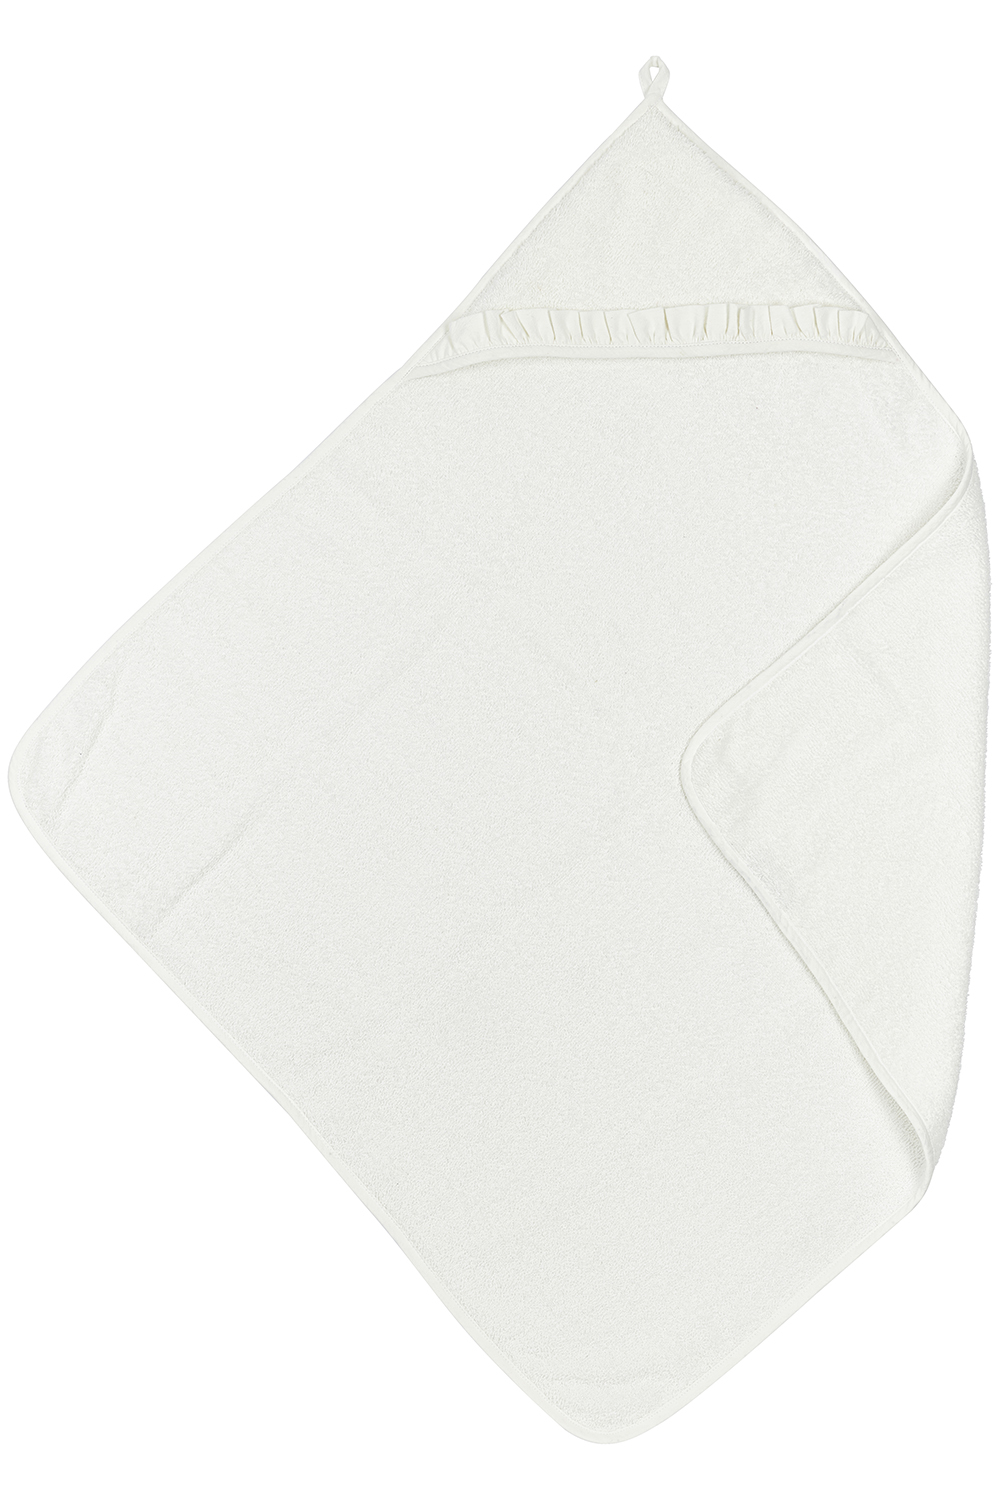 Kapuzentuch frottee Ruffle - offwhite - 80x80cm